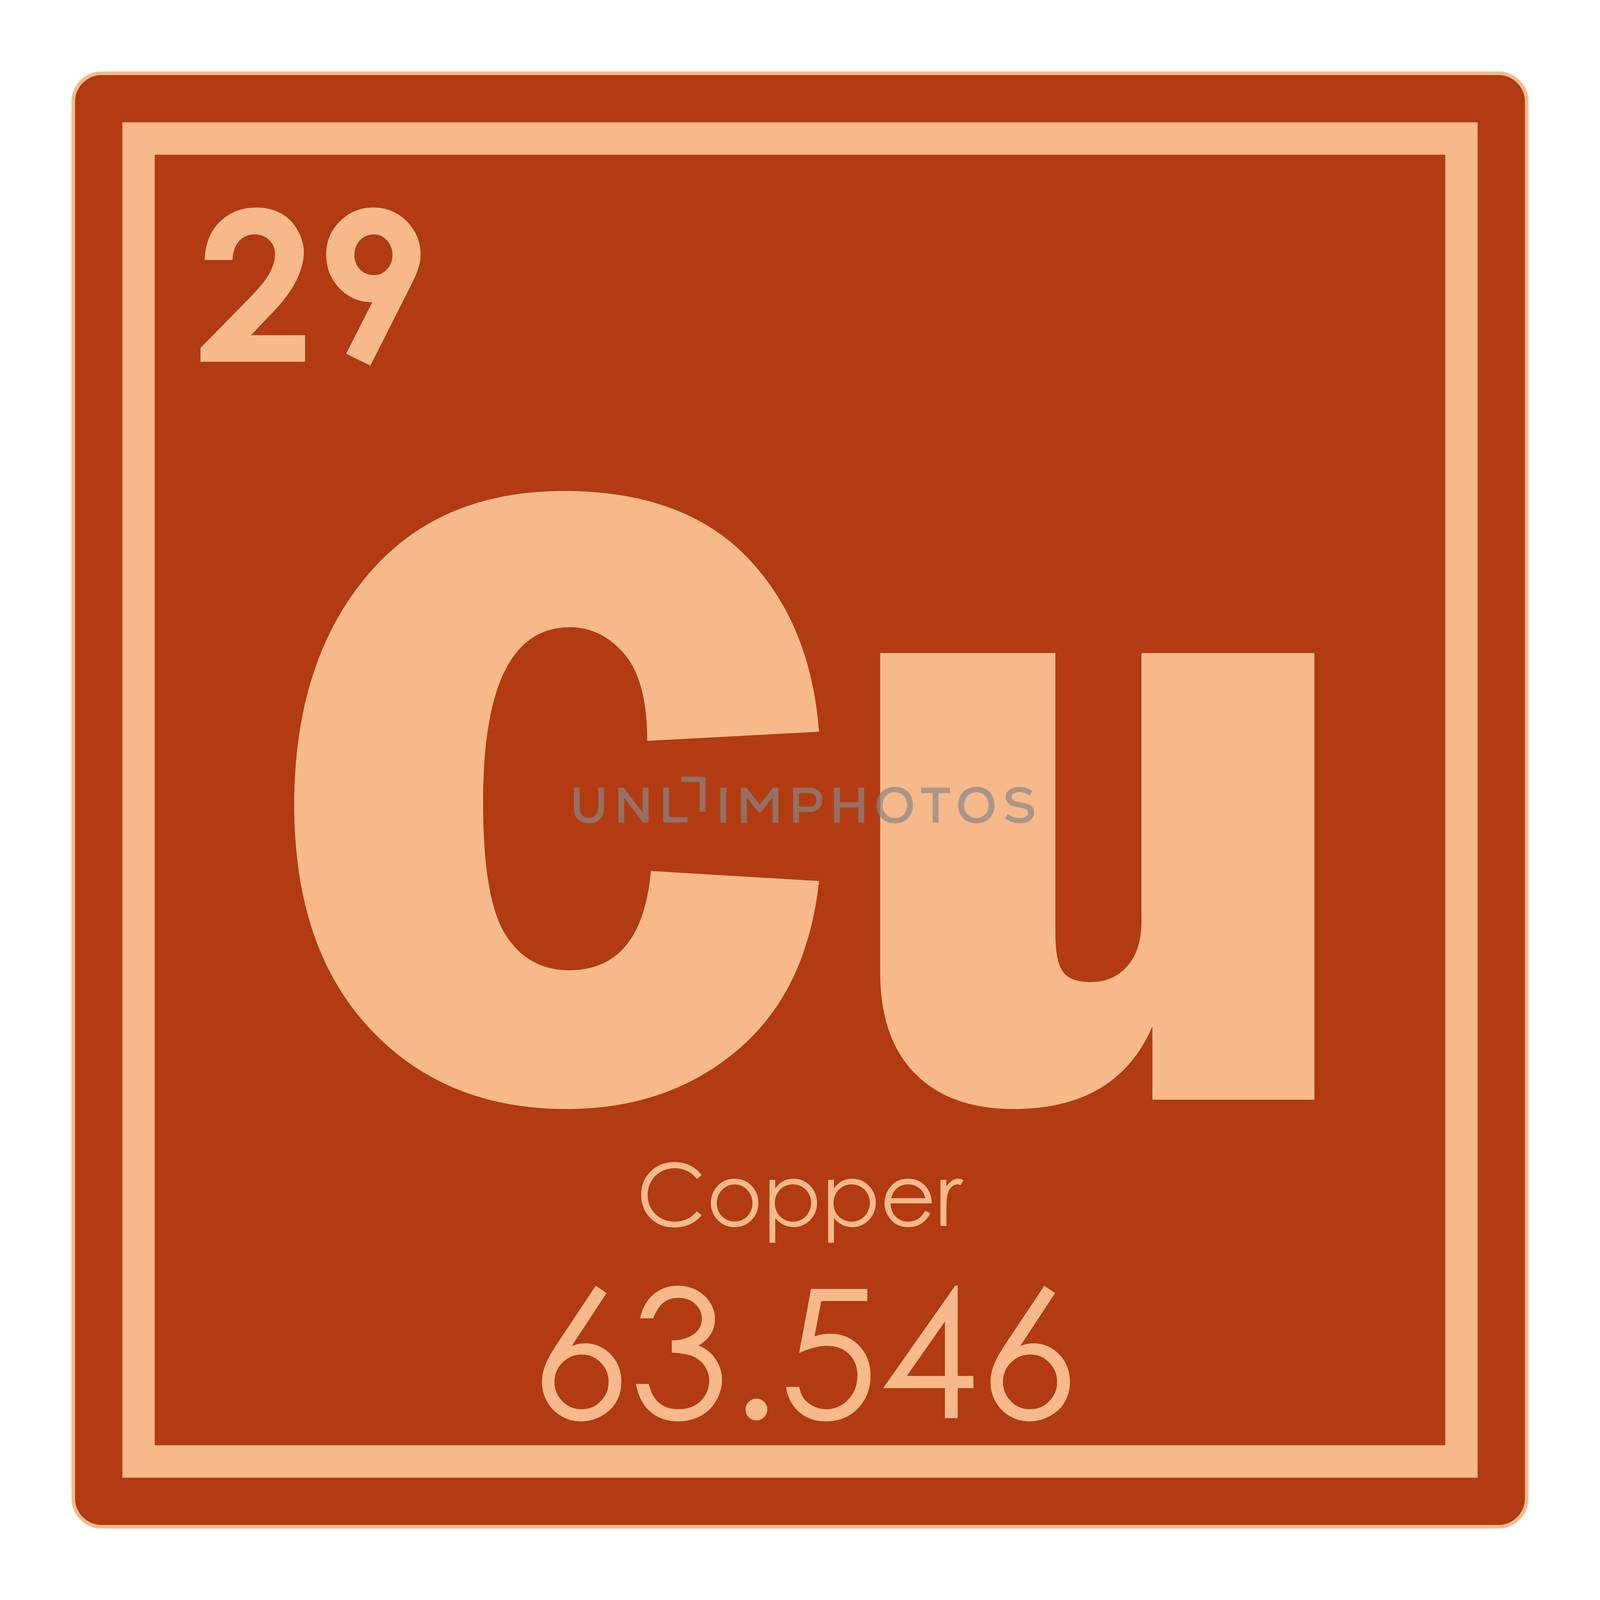 Copper chemical element by tony4urban